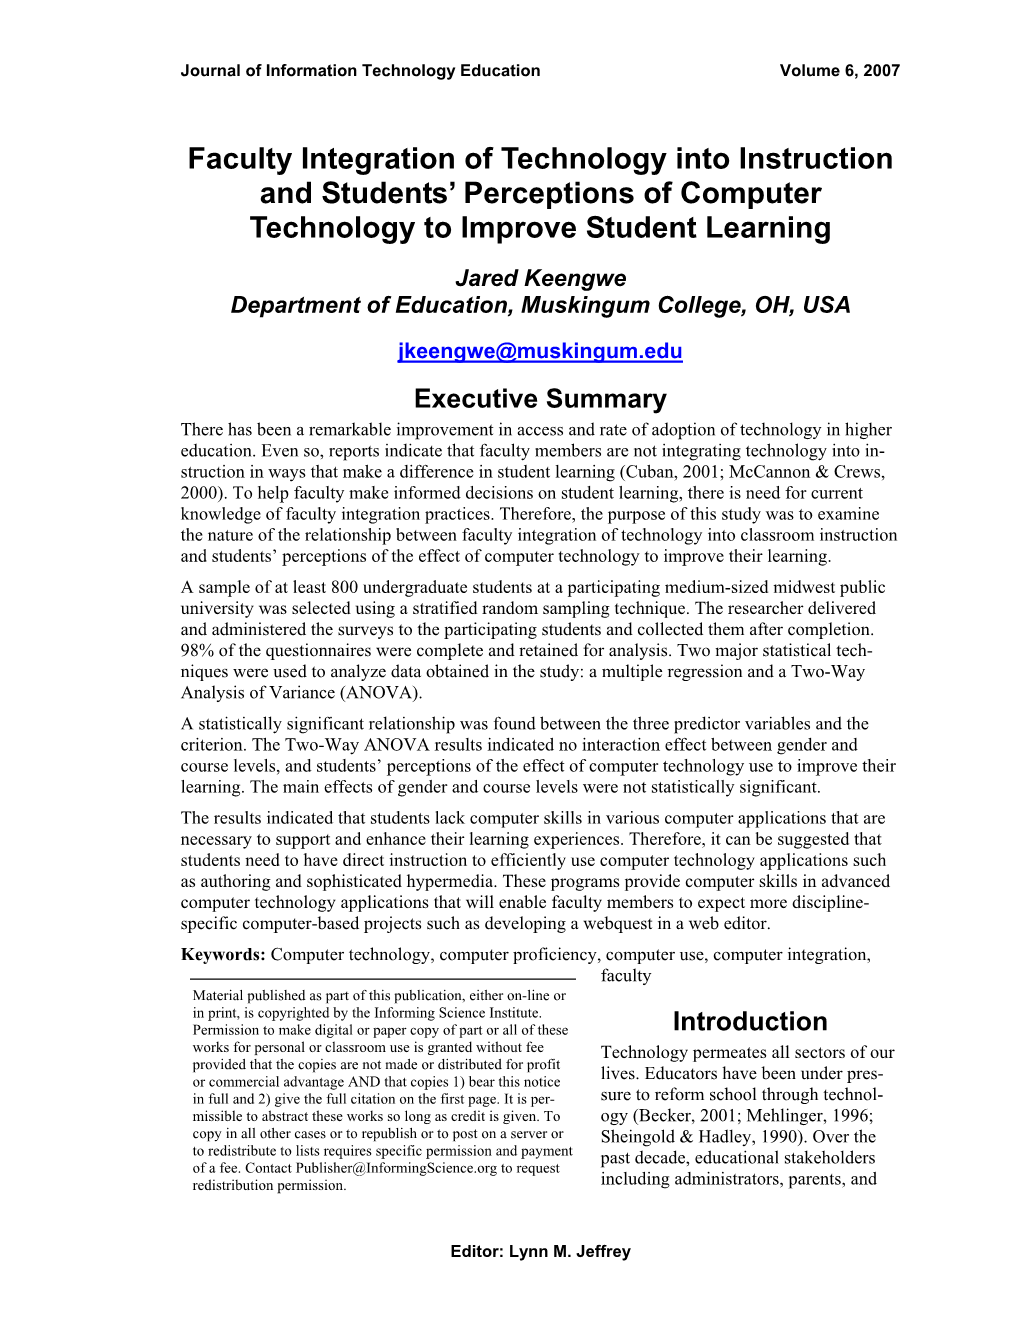 Faculty Integration of Technology Into Instruction and Students’ Perceptions of Computer Technology to Improve Student Learning